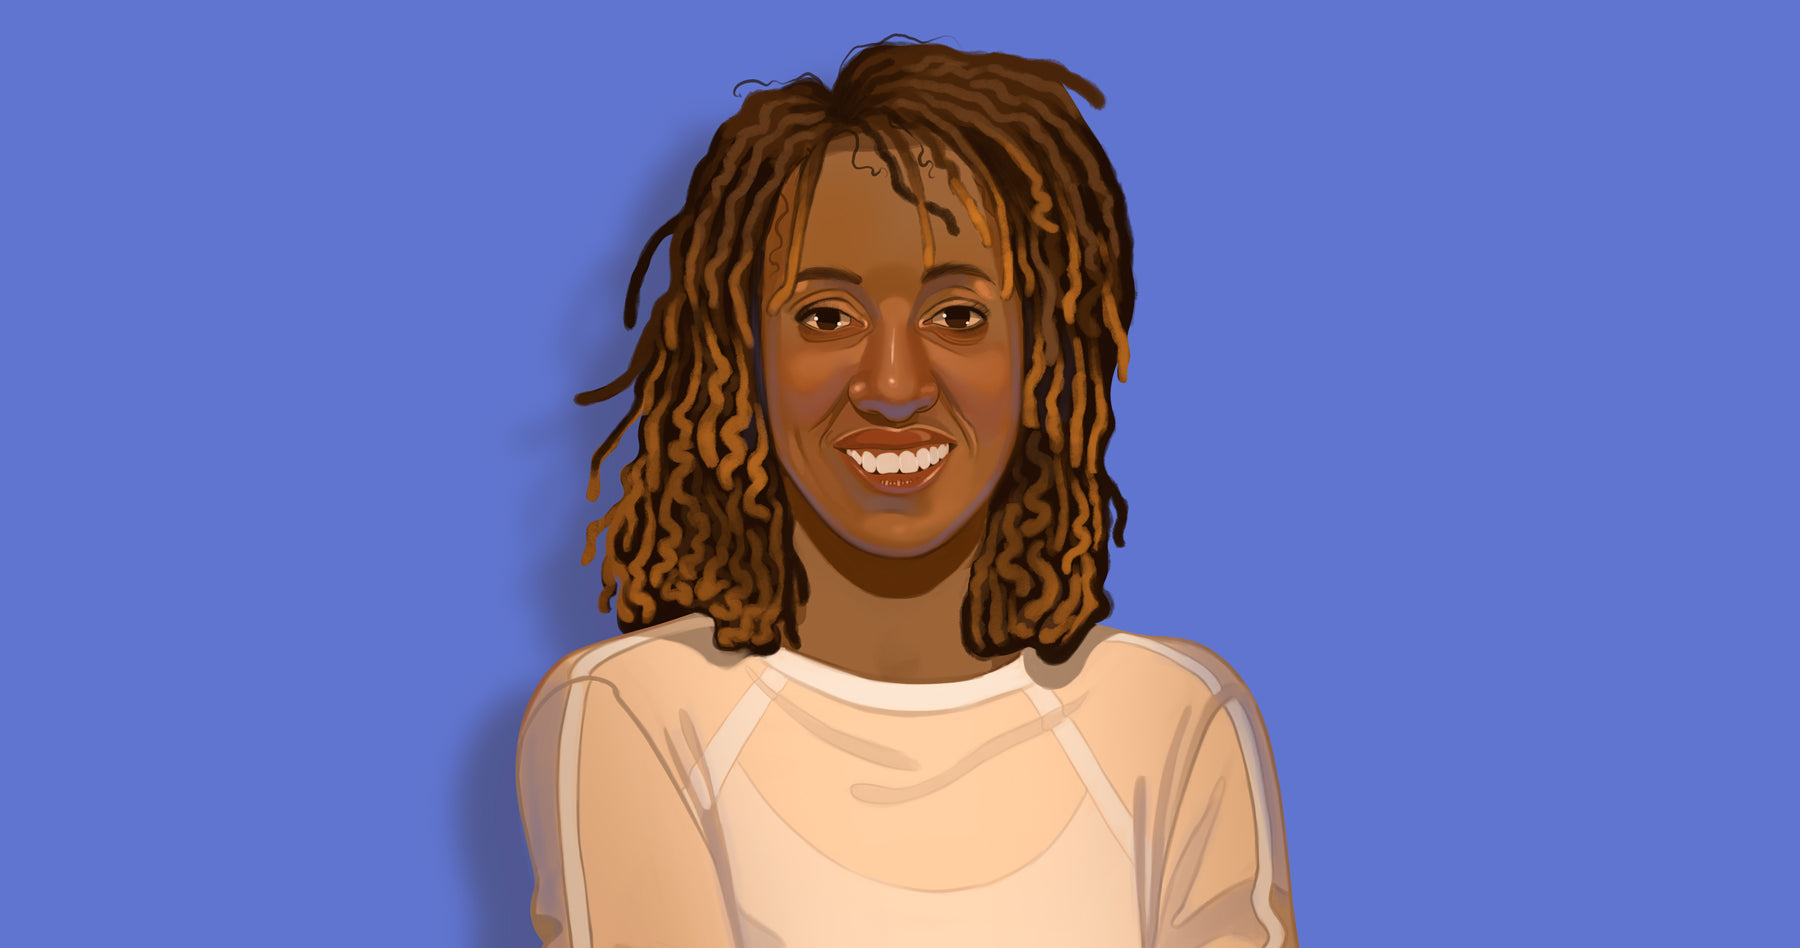 Portrait illustration of Melony Armstrong founder of Naturally Speaking. 